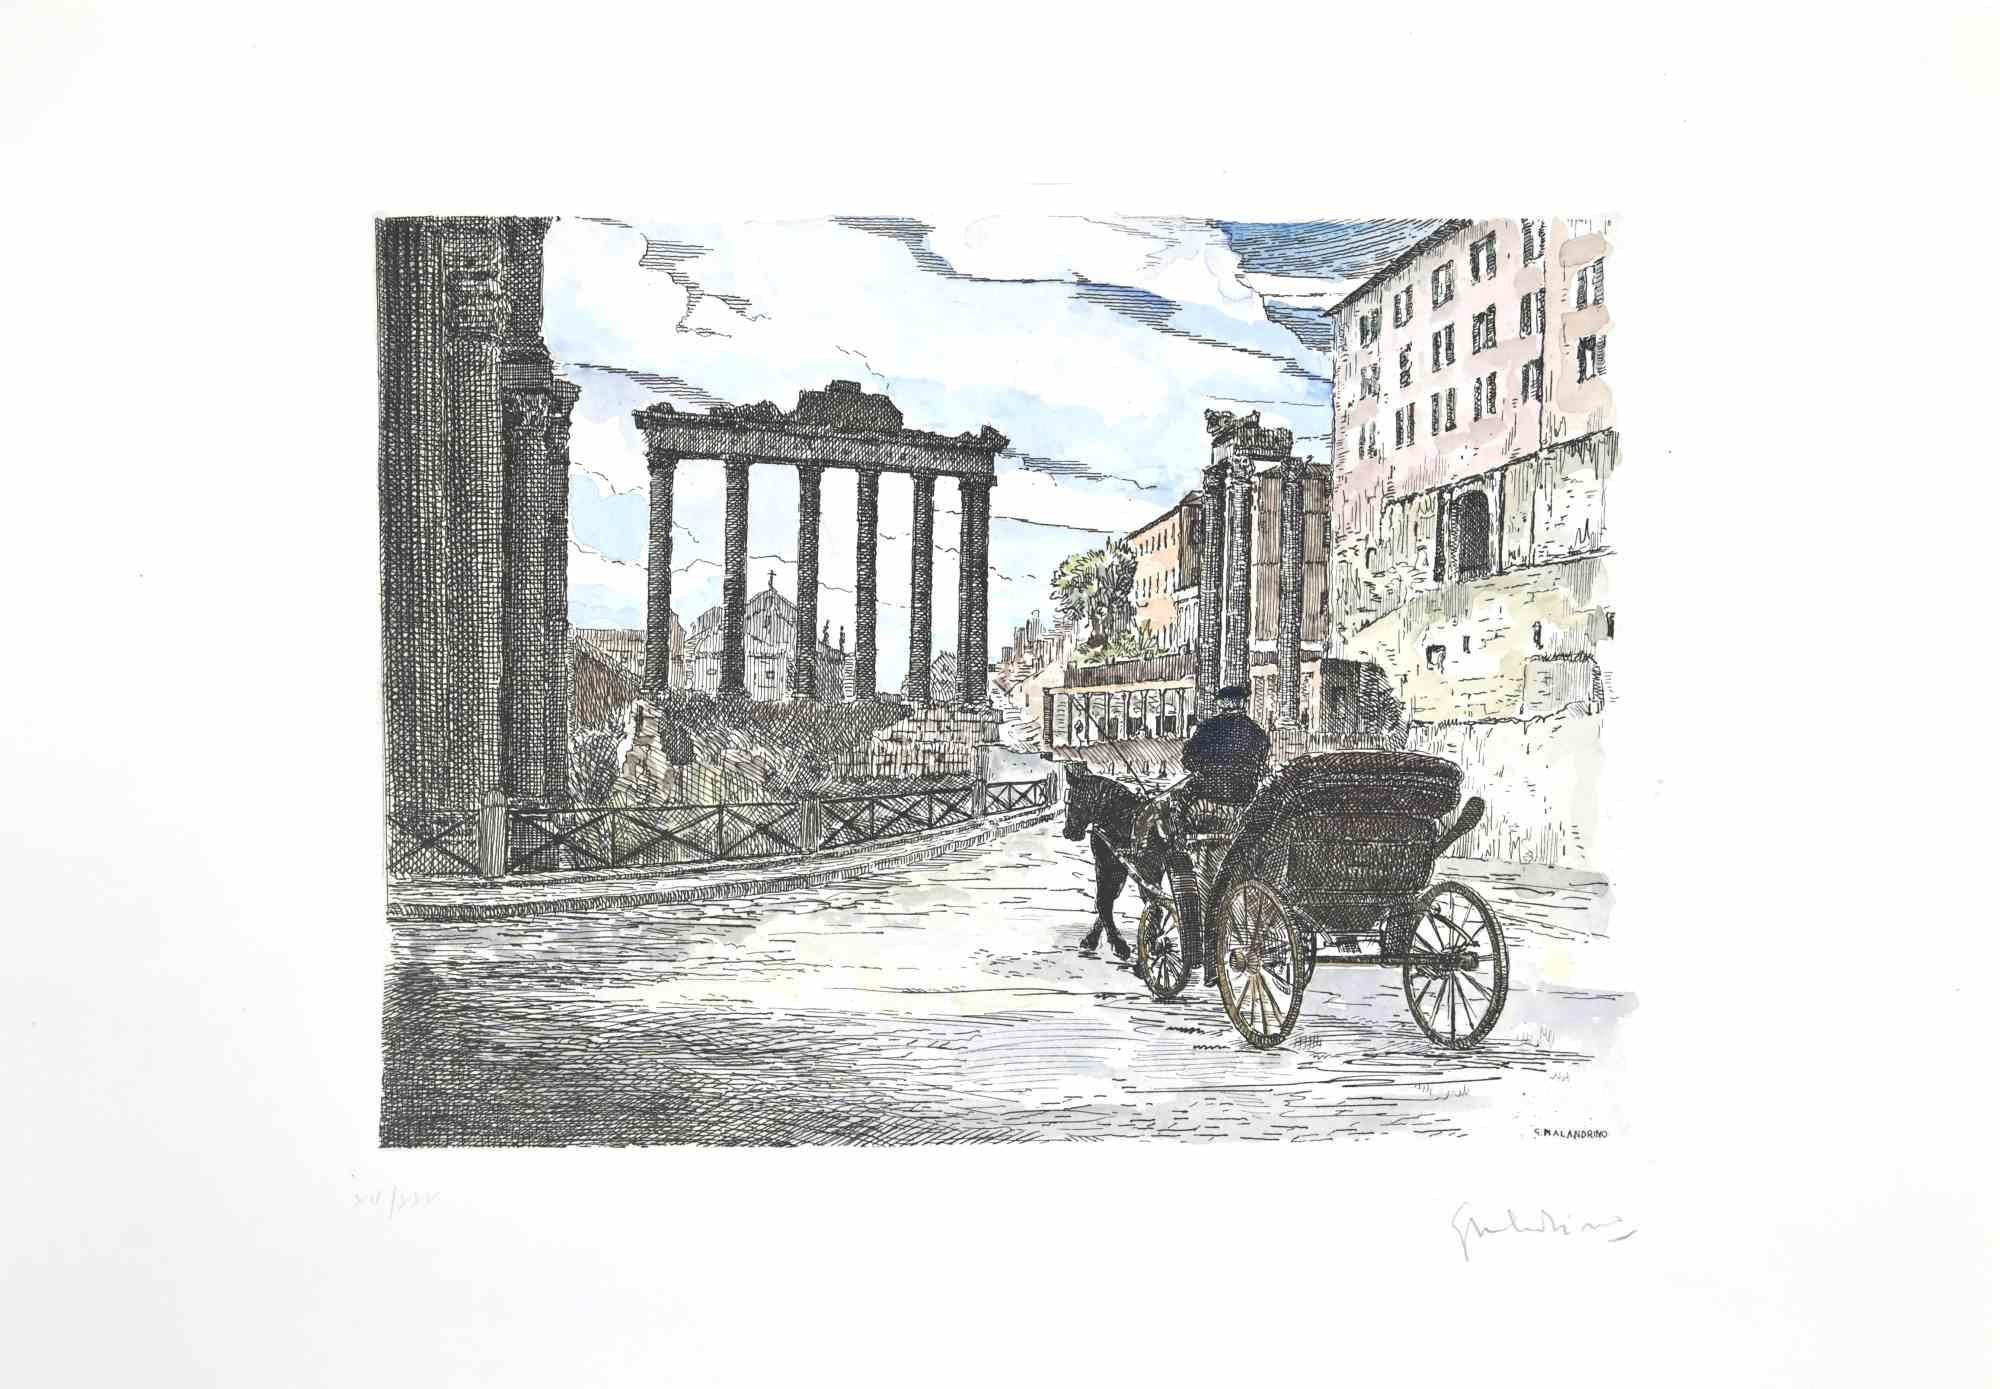 Roman Forum is an artwork realized by Giuseppe Malandrino.

Print in etching technique and hand watercolored.

Hand-signed by the artist in pencil on the lower right corner.

Numbered edition of 30 copies.

Good condition.

This artwork represents